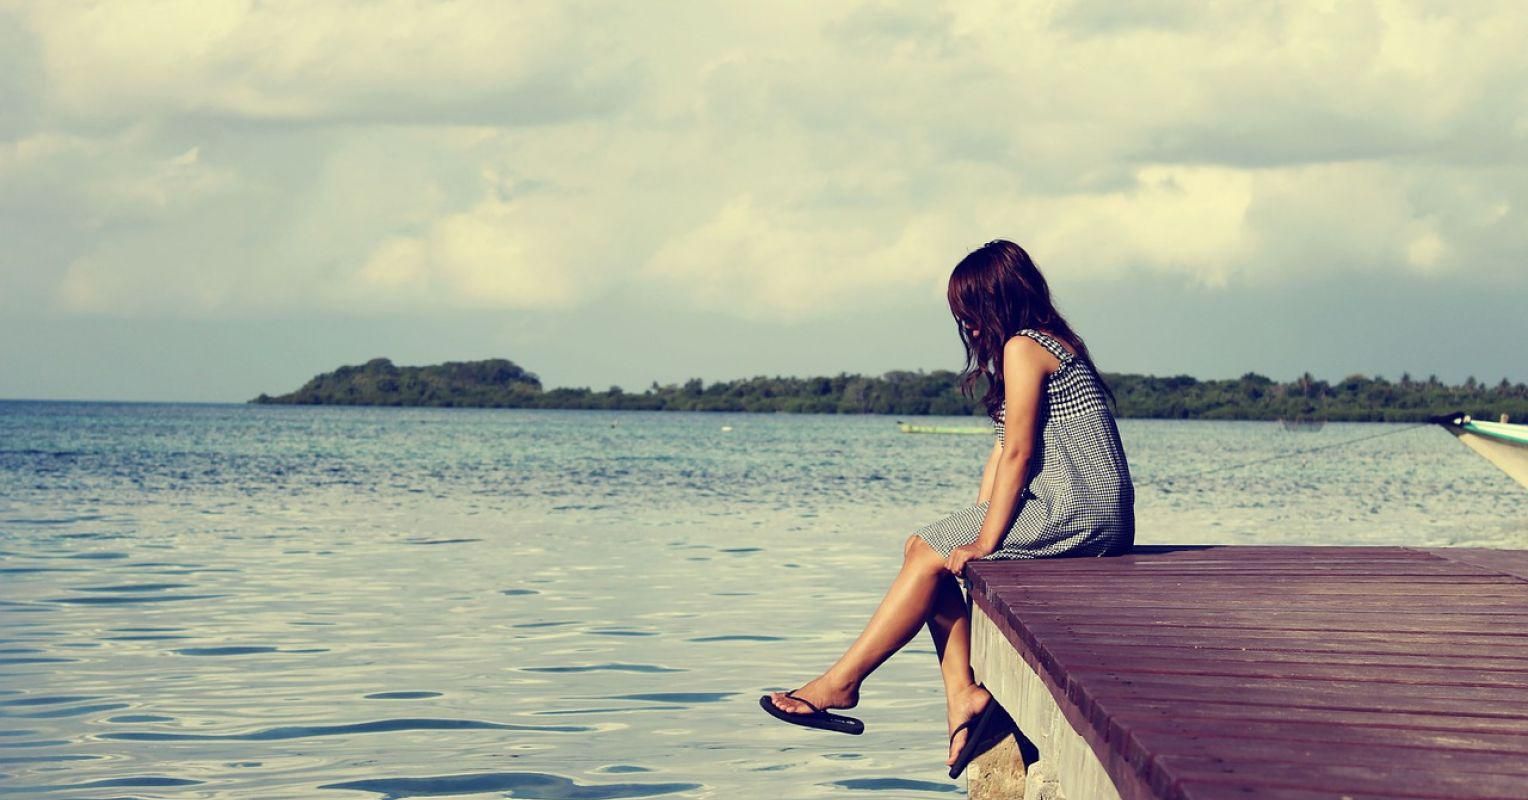 4 Tips to Be Alone without Being Lonely